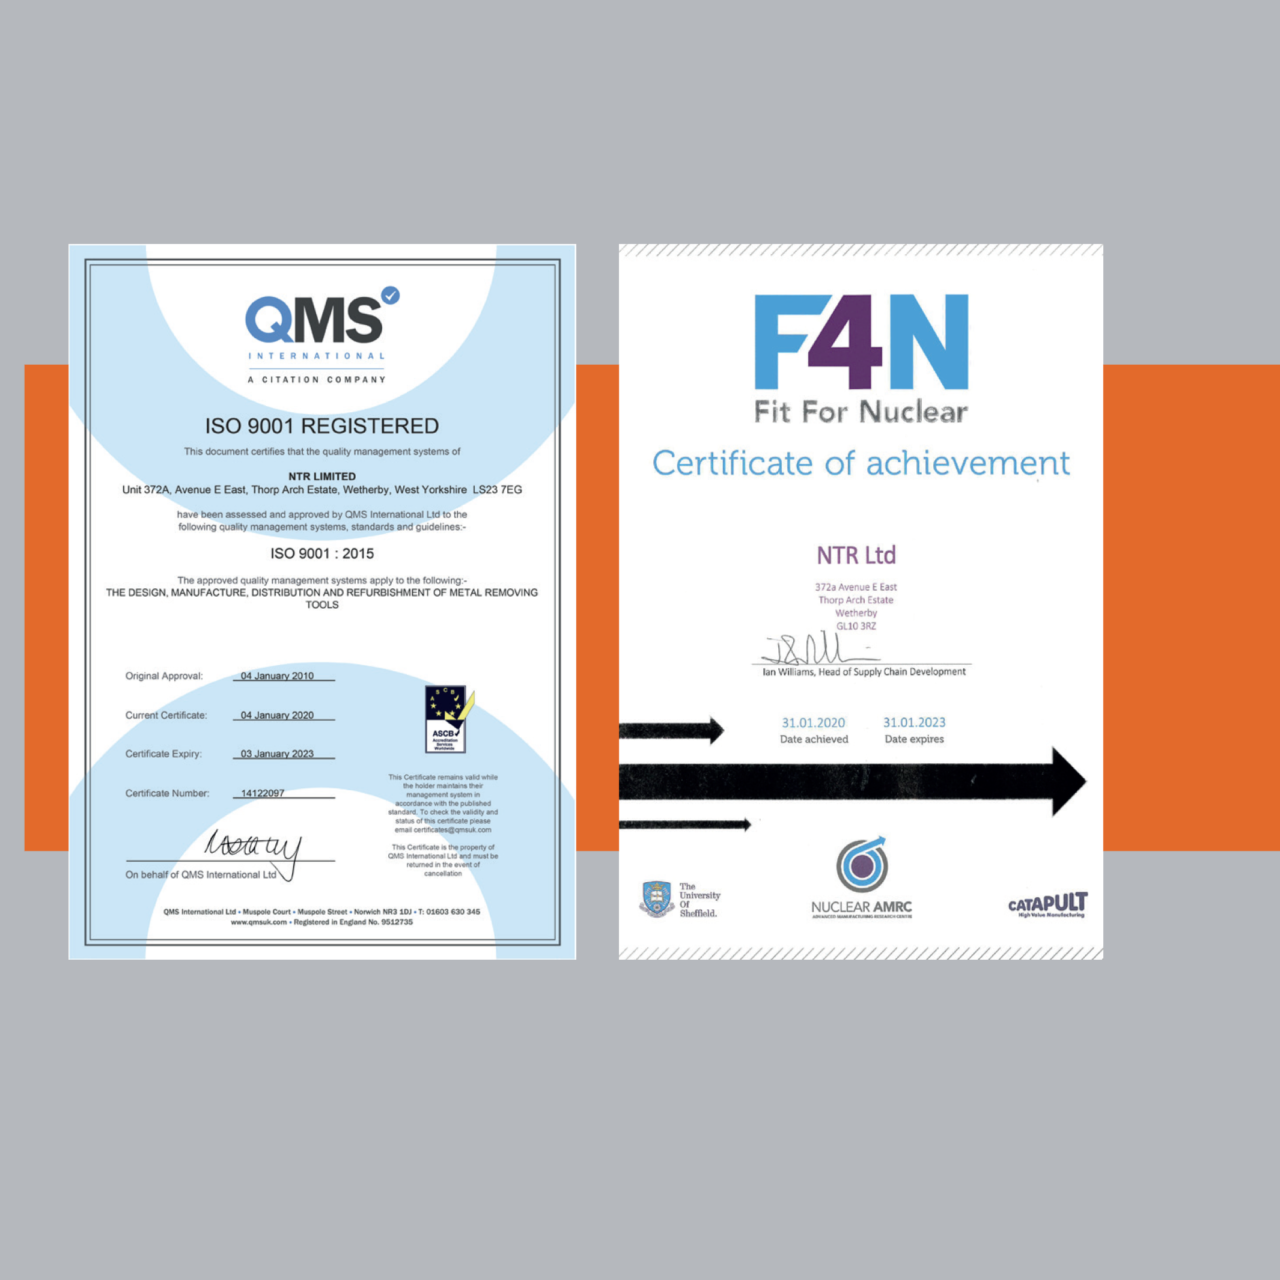 Our Accreditations ISO 9001:2015 and Fit4Nuclear | NTR Ltd